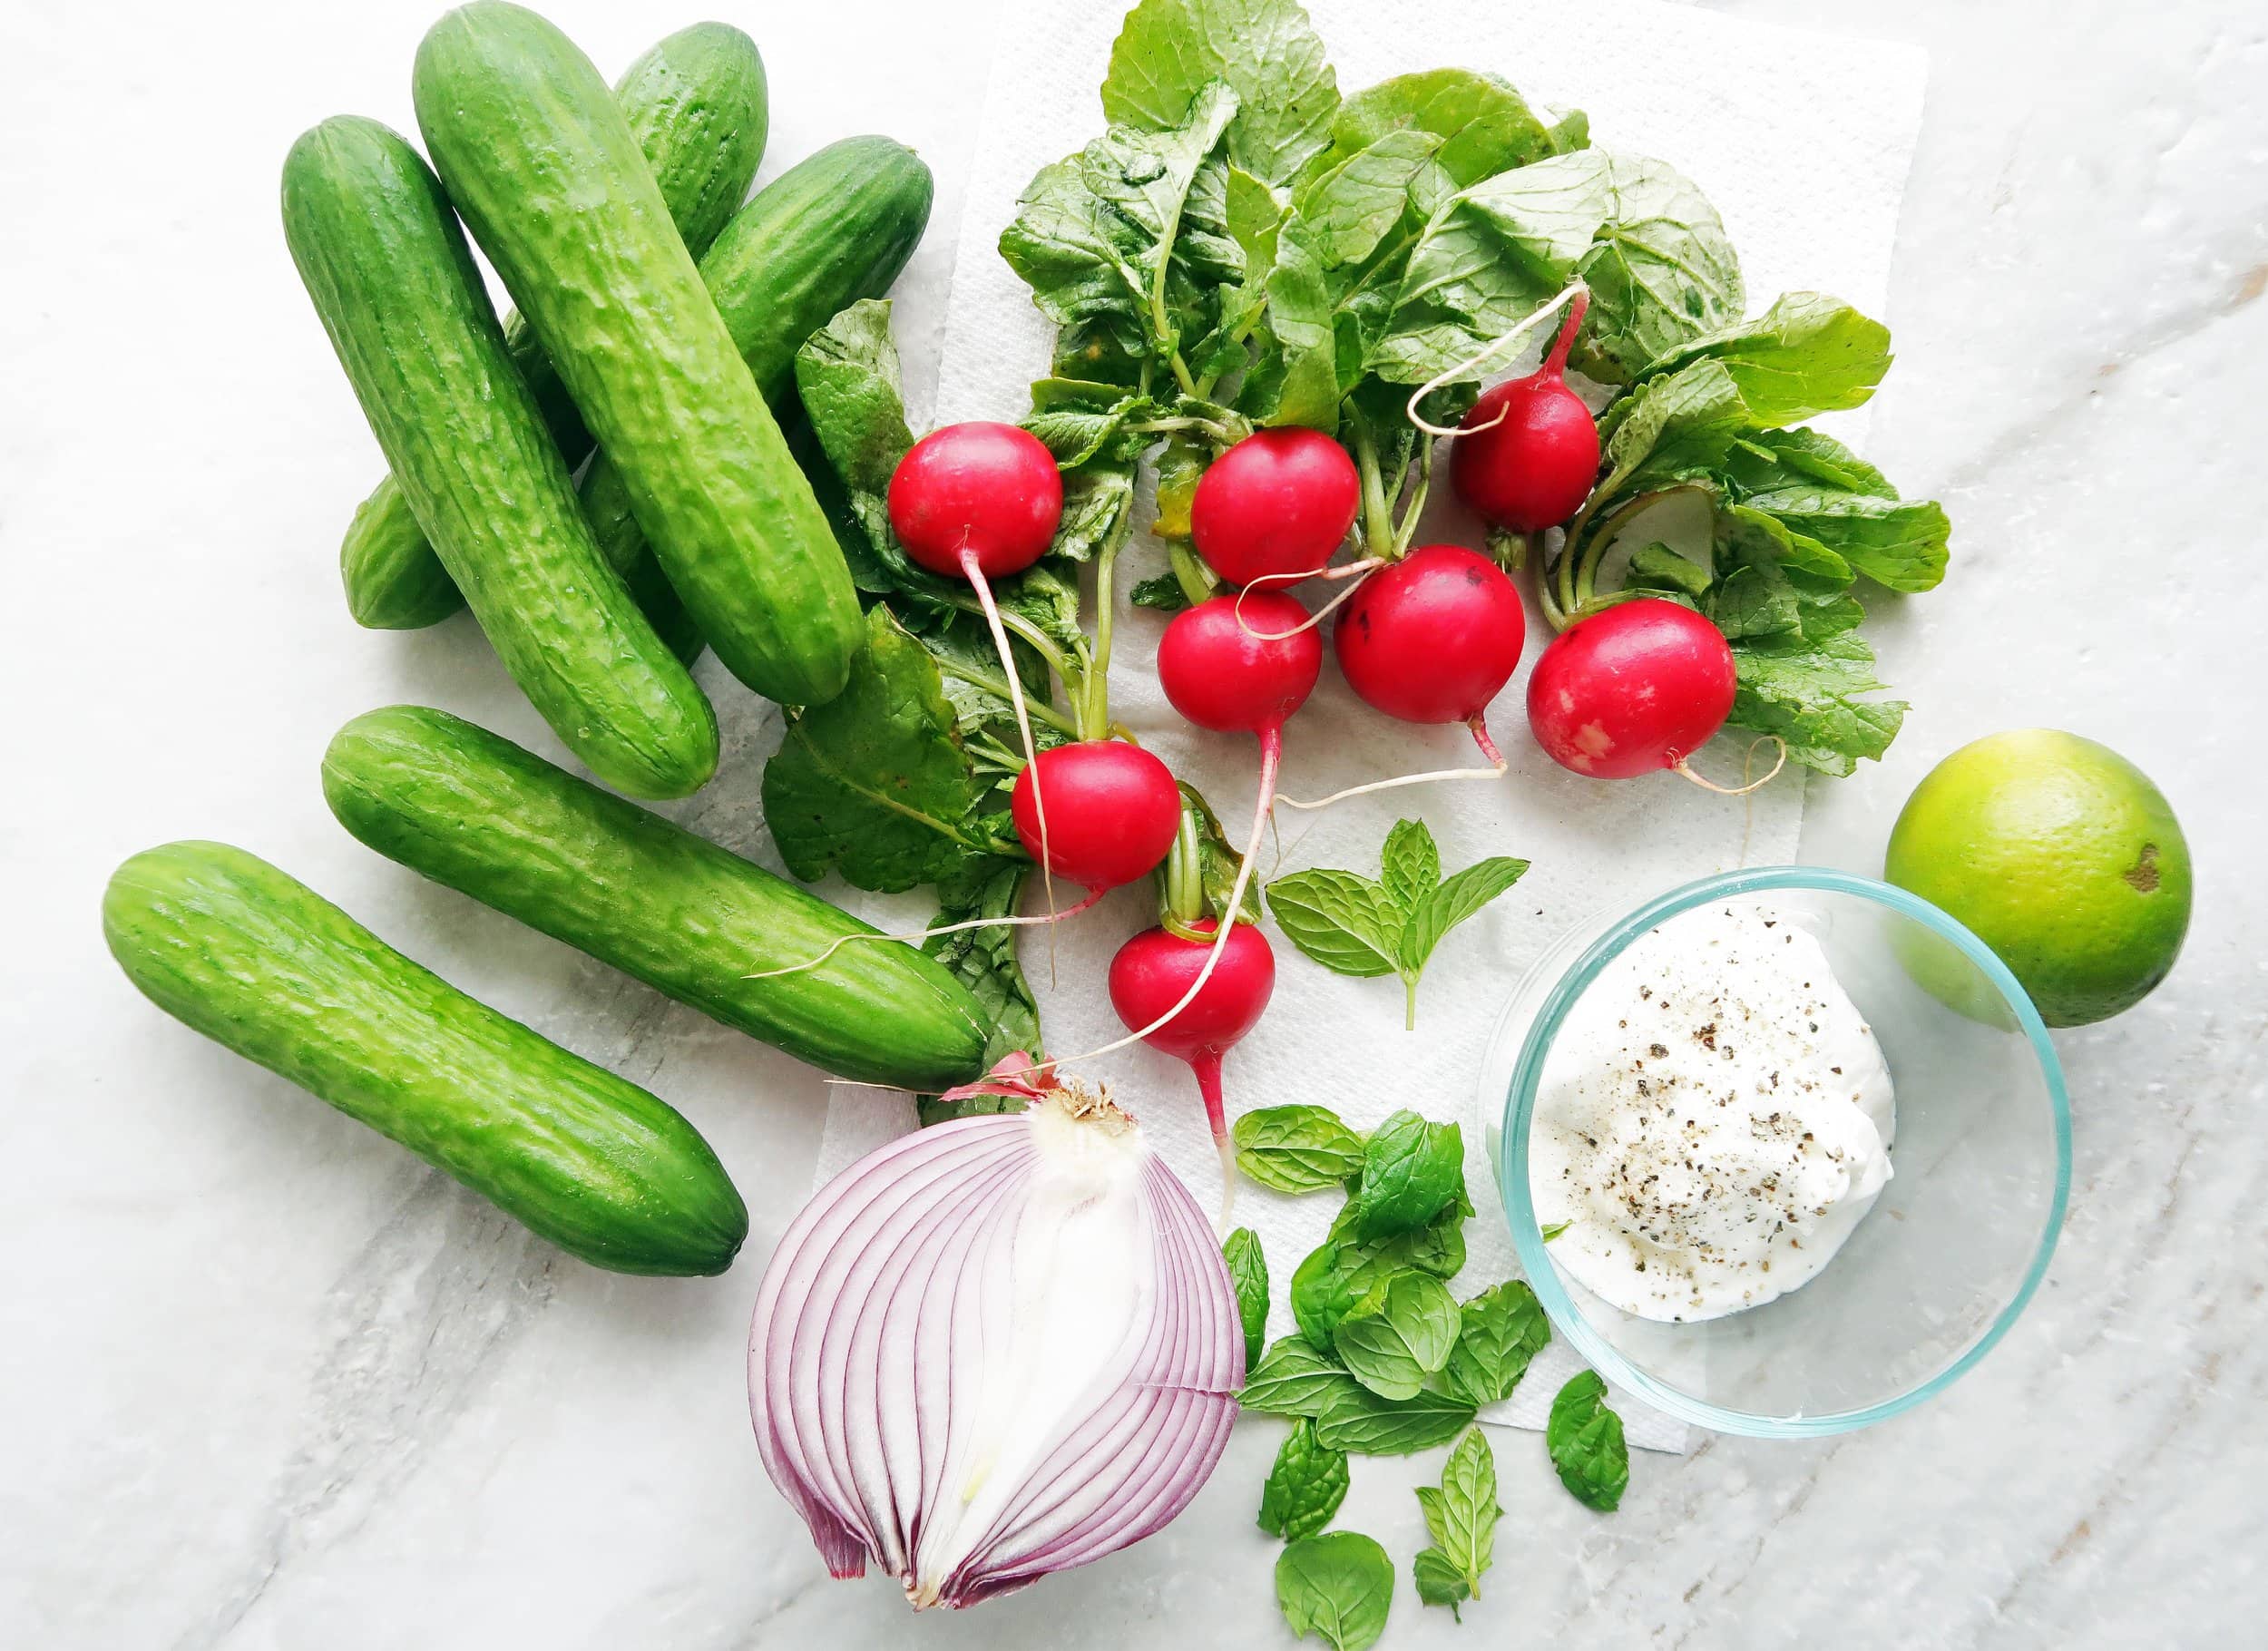 Cucumbers, radishes, a red onion, a lime, mint leaves, and a bowl of yogurt.